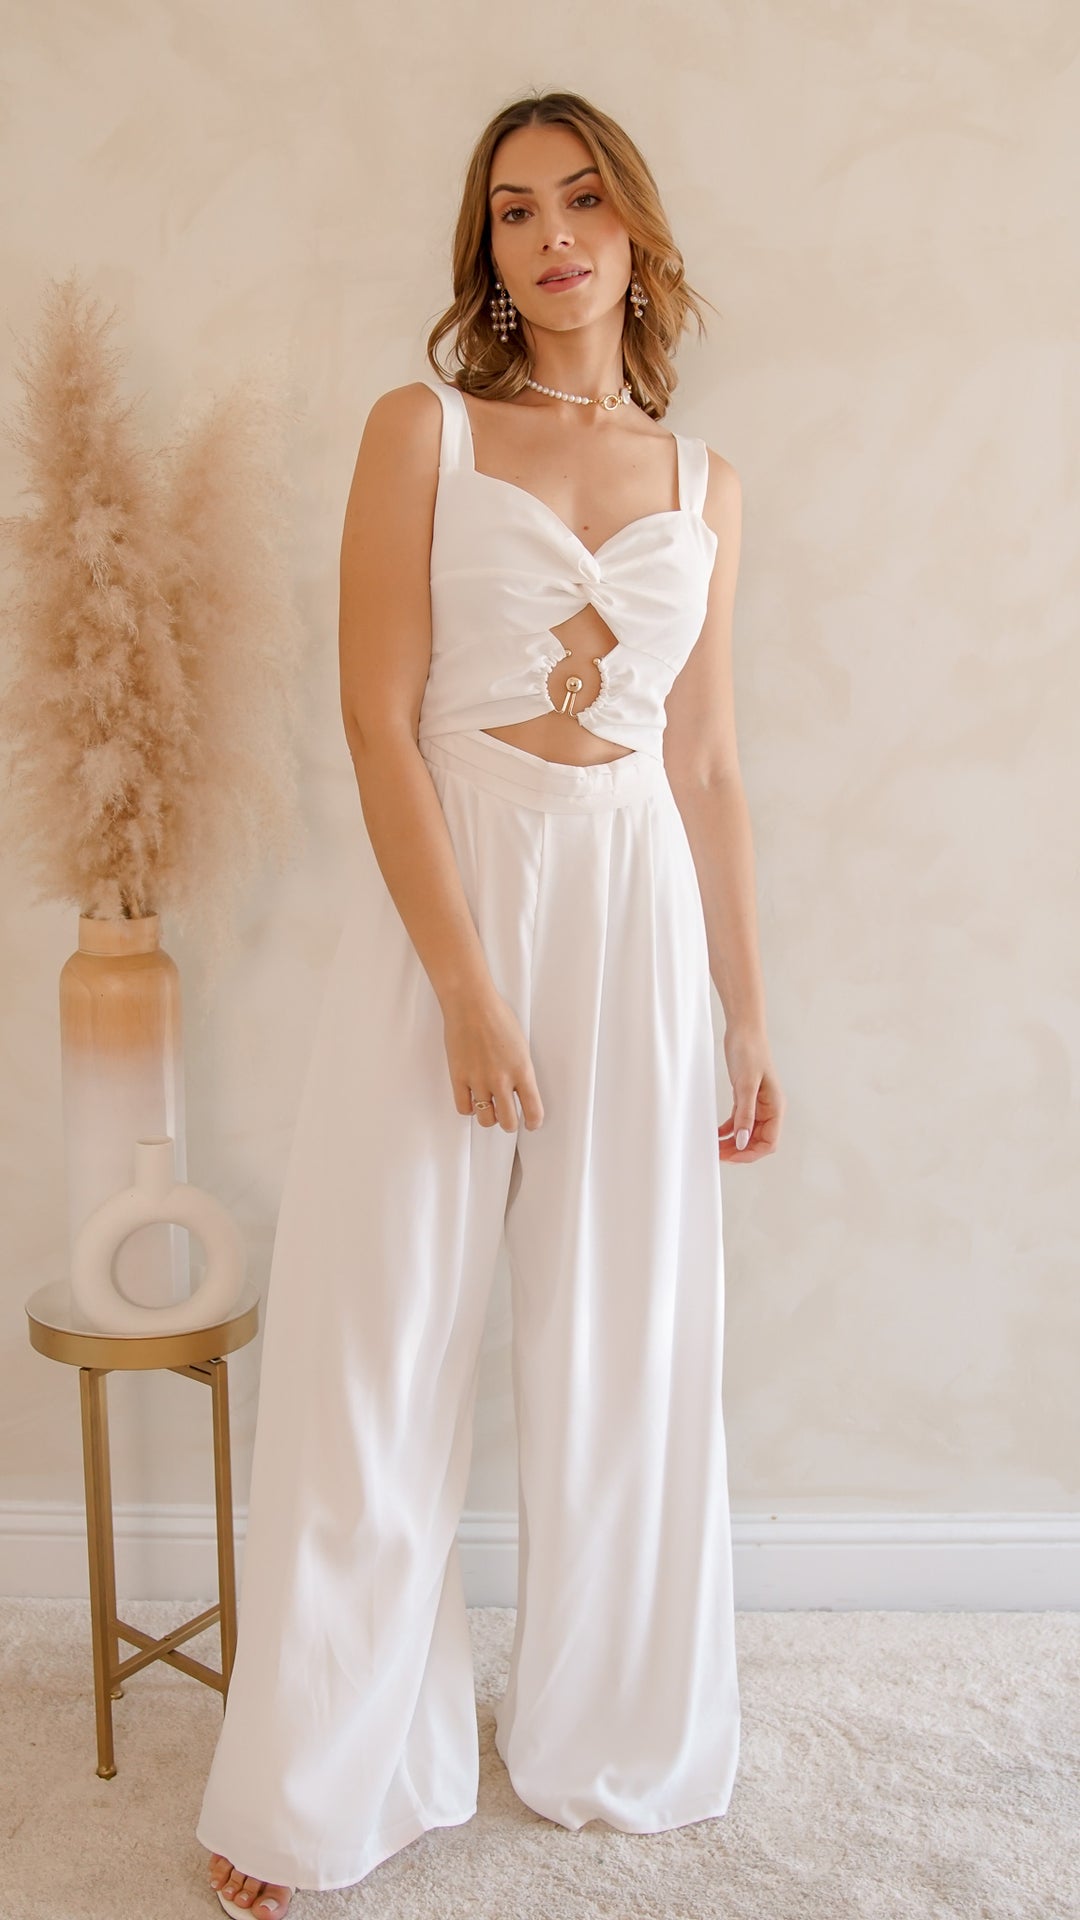 Charlotte Cut Out White Jumpsuit - Steps New York